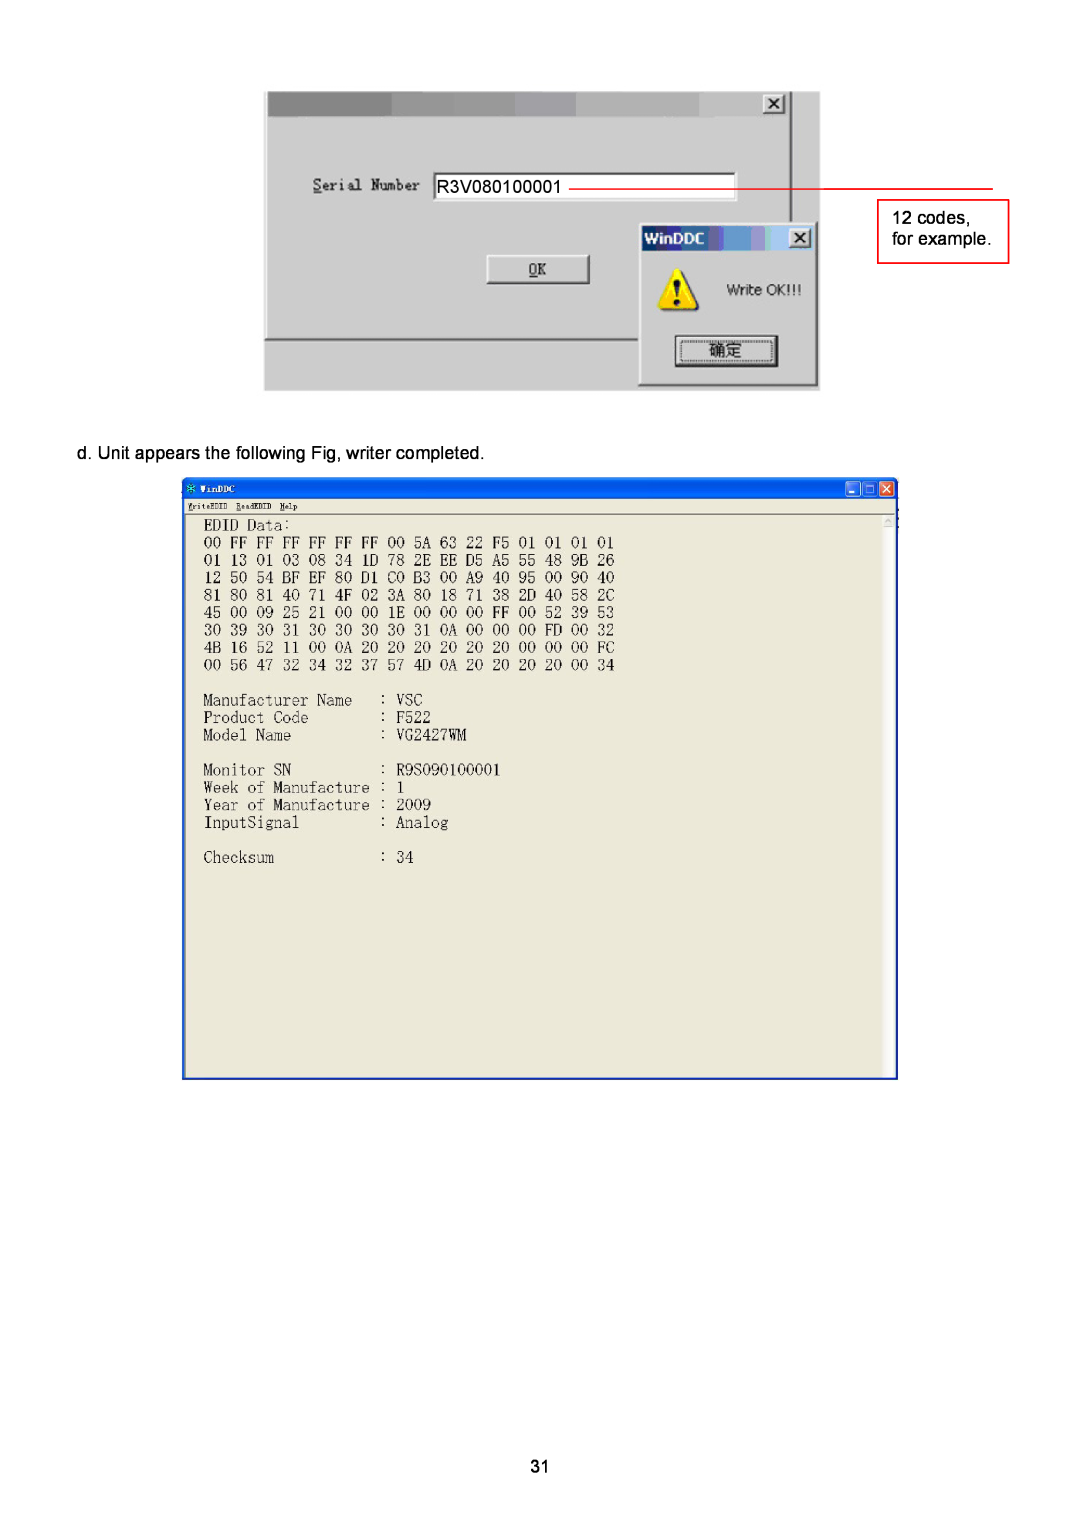 ViewSonic VSXXXXX service manual R3V080100001 12 codes, for example, d. Unit appears the following Fig, writer completed 